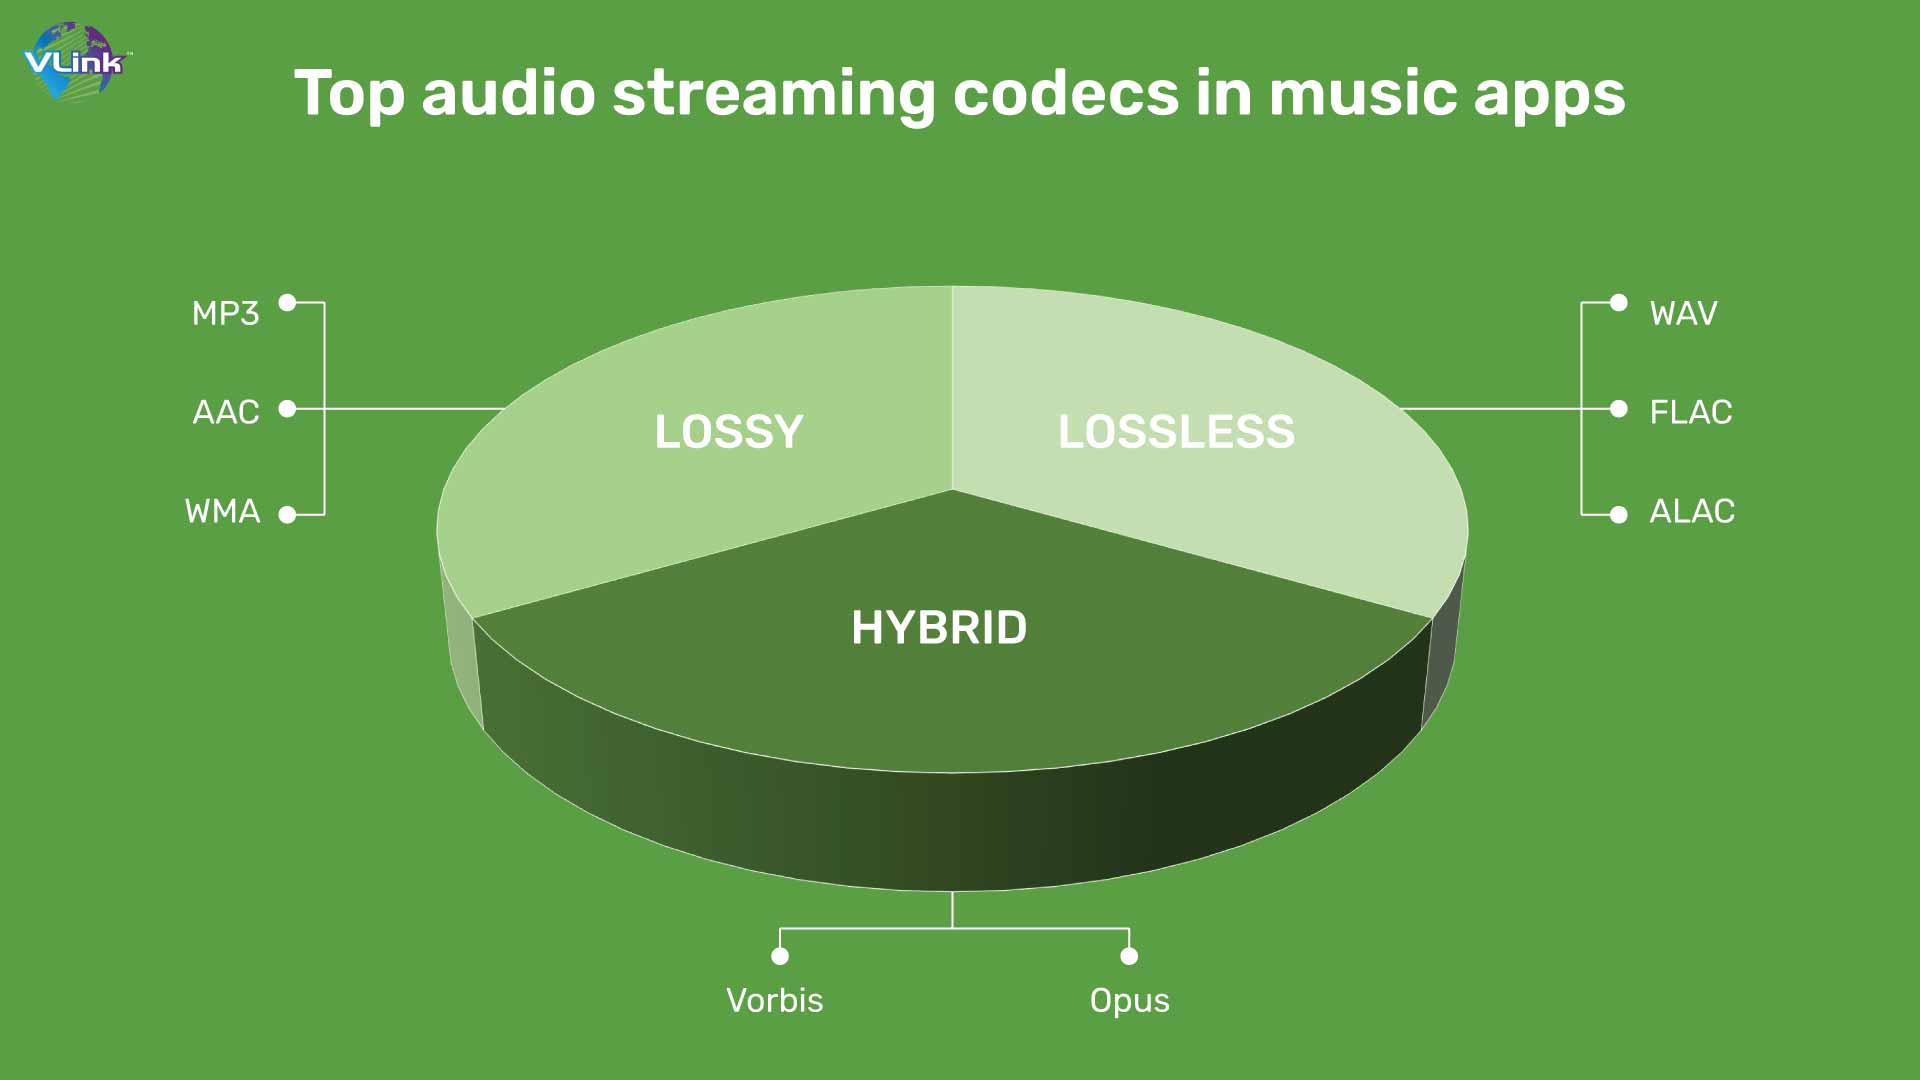 Top audio streaming codecs in music apps